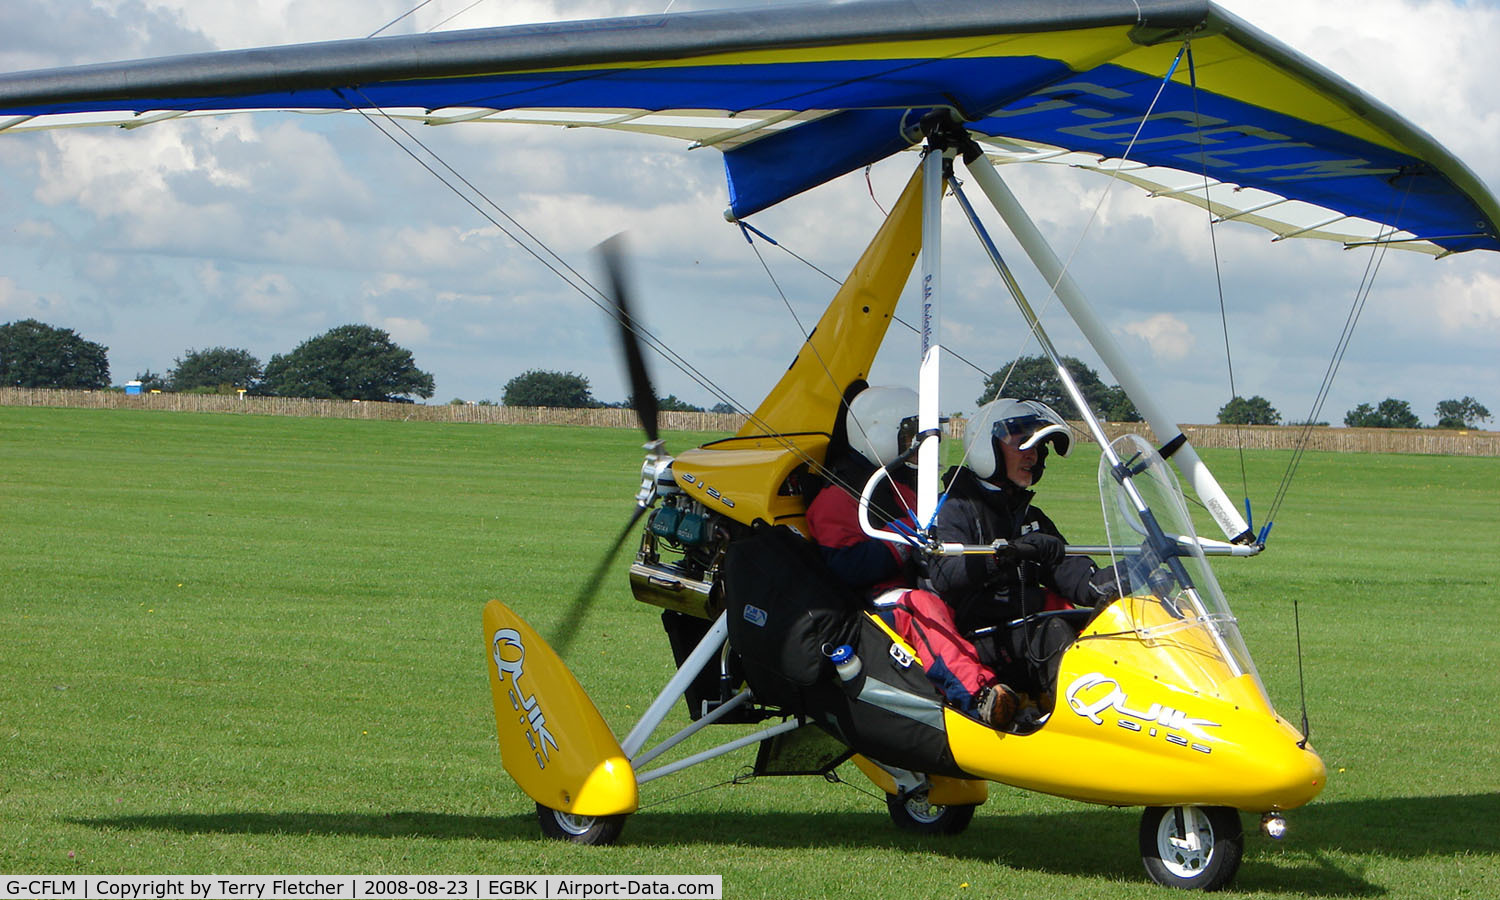 G-CFLM, 2008 Mainair Pegasus Quik C/N 8399, Visitor to Sywell on 2008 Ragwing Fly-in day